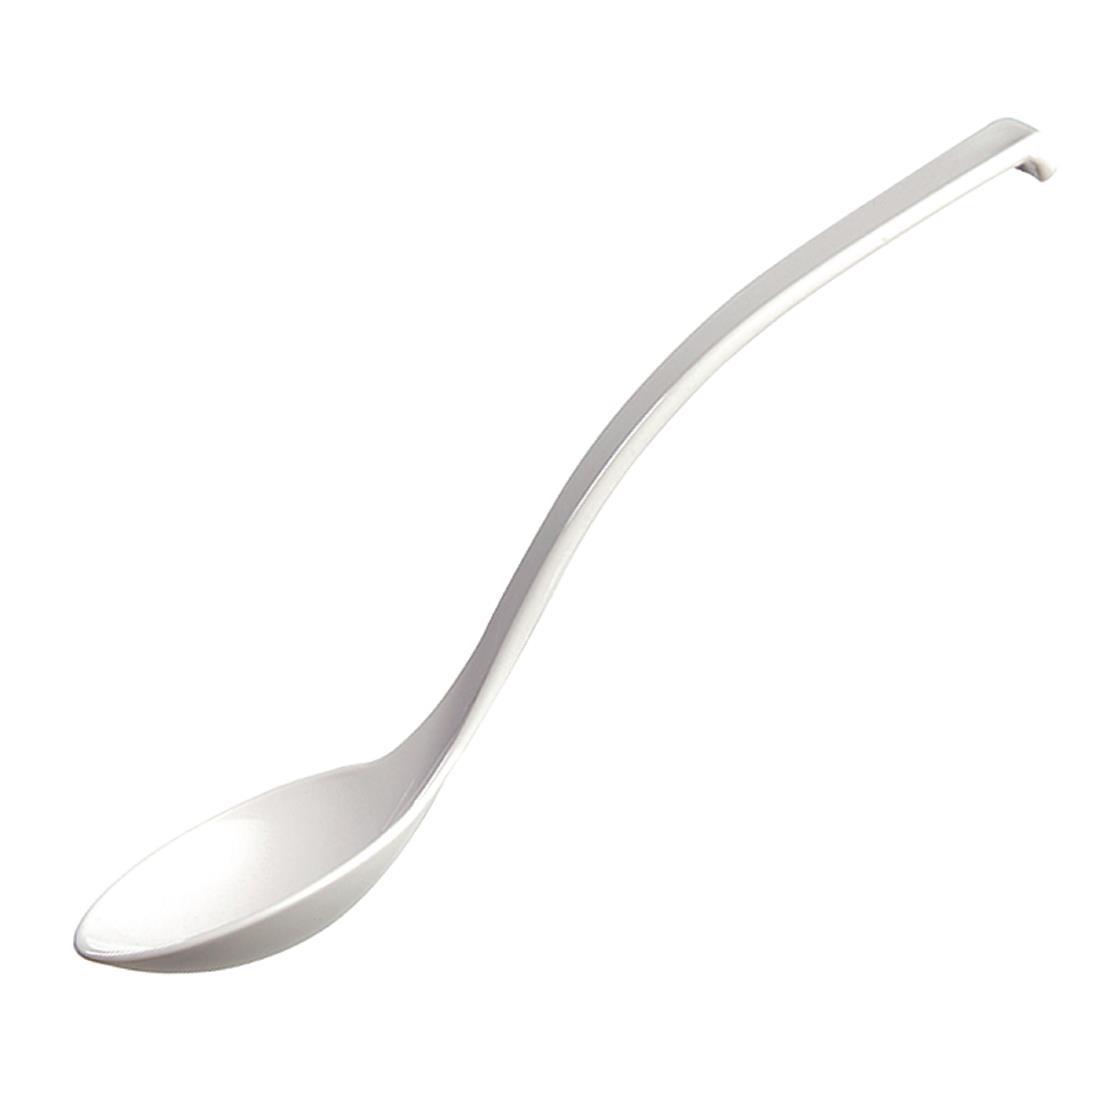 APS White Deli Spoon (Pack of 6) - GH358  - 1